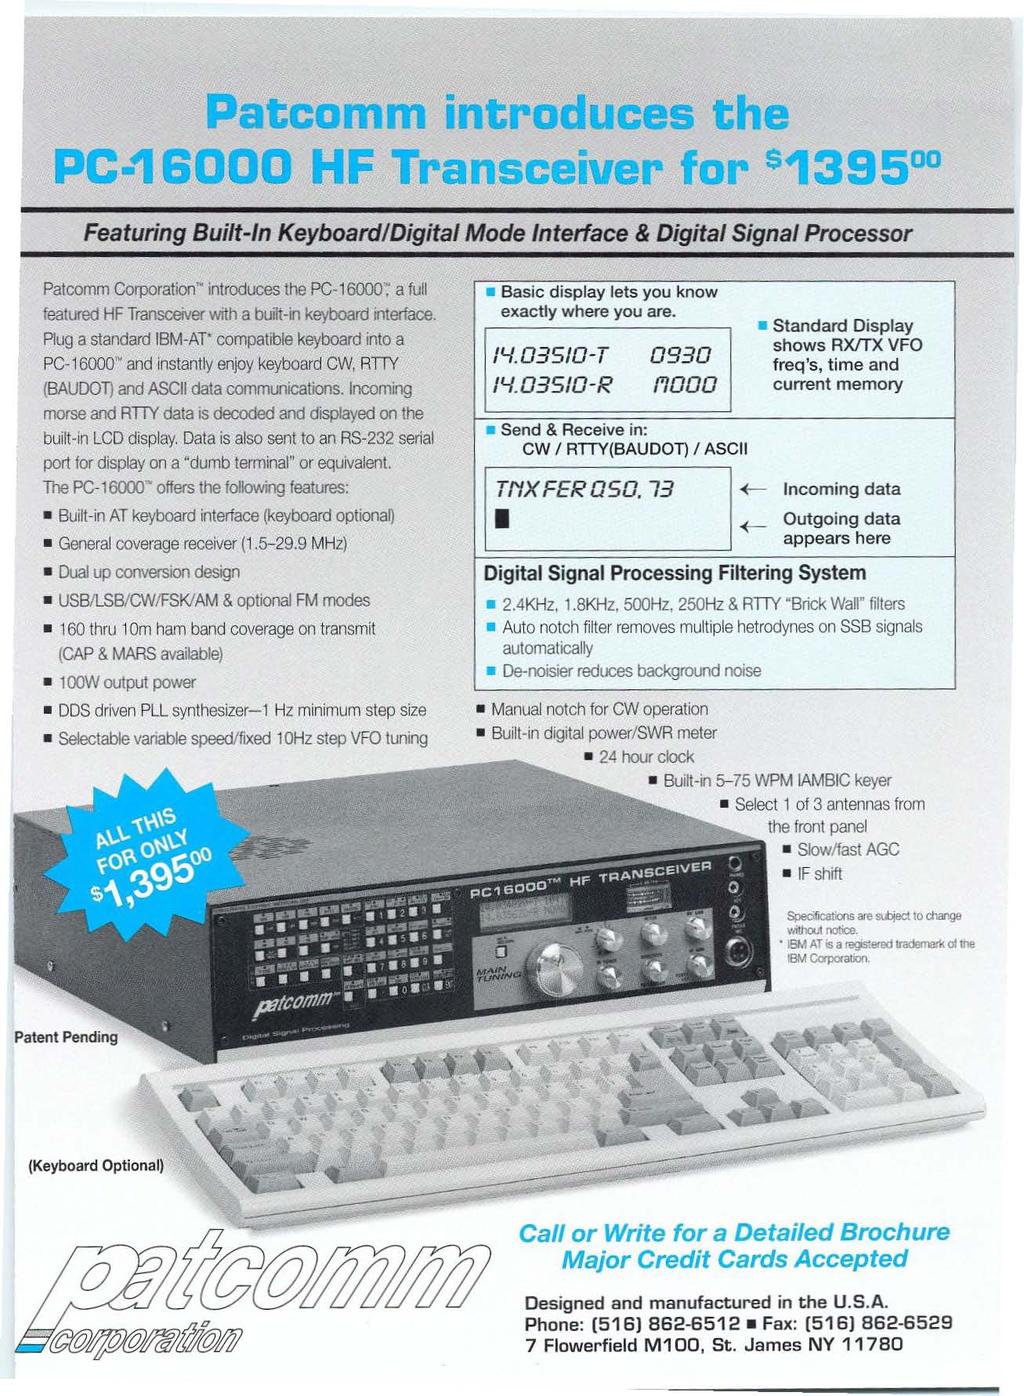 Patcomm introduces the PC 16000 HF Transceiver for $1395 00 Featuring Built-n Keyboard/Digital Mode nterface & Digital Signal Processor Palcomm Corporation" introduces the PC 160007 a fun featured HF